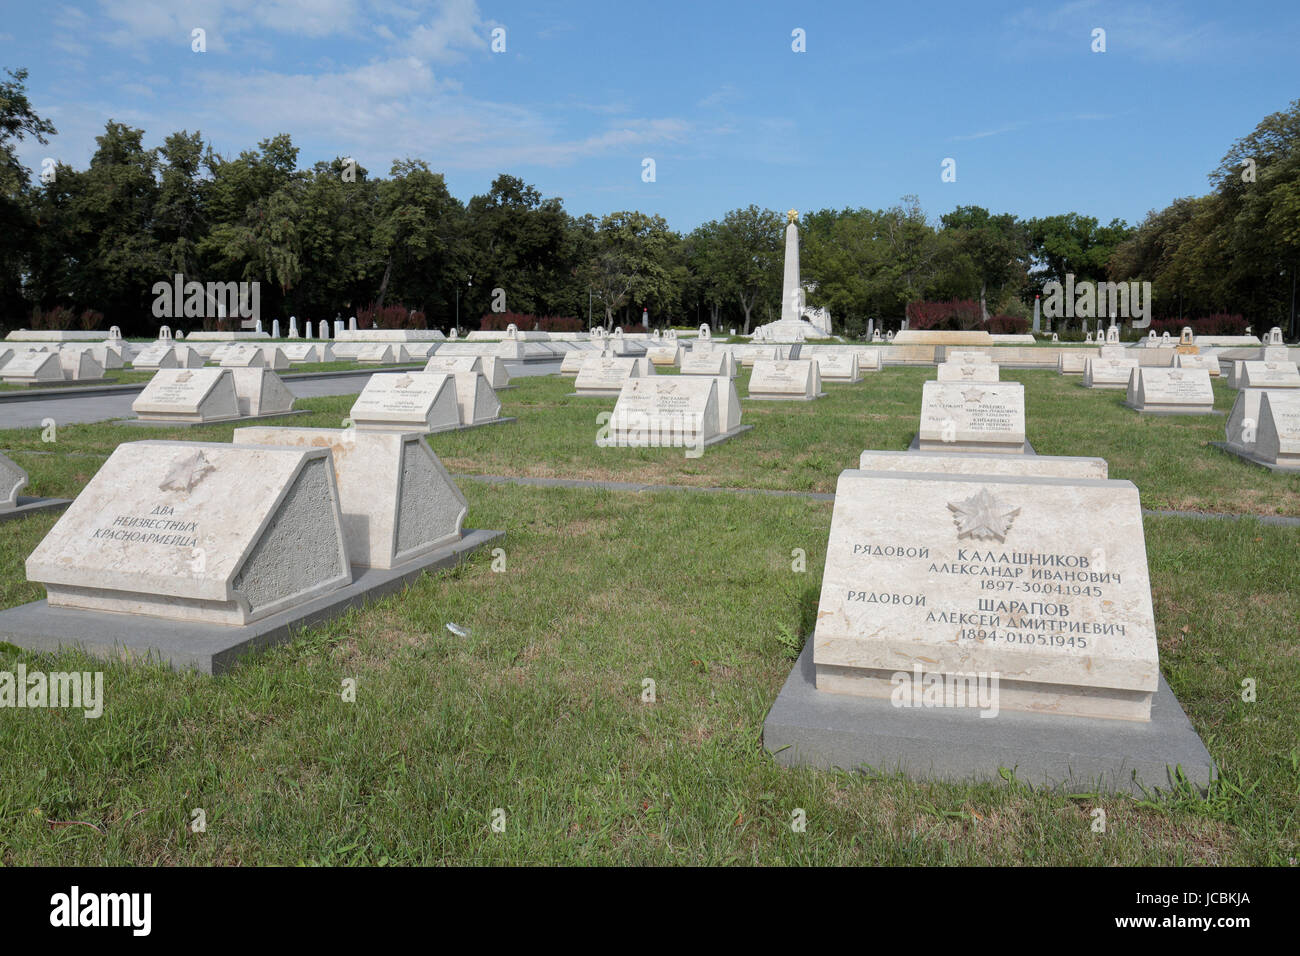 The military plot with Russian war graves from the Second World War in the Kerepesi Cemetery, Budapest, Hungary.  There are 489 soldiers and officers Stock Photo